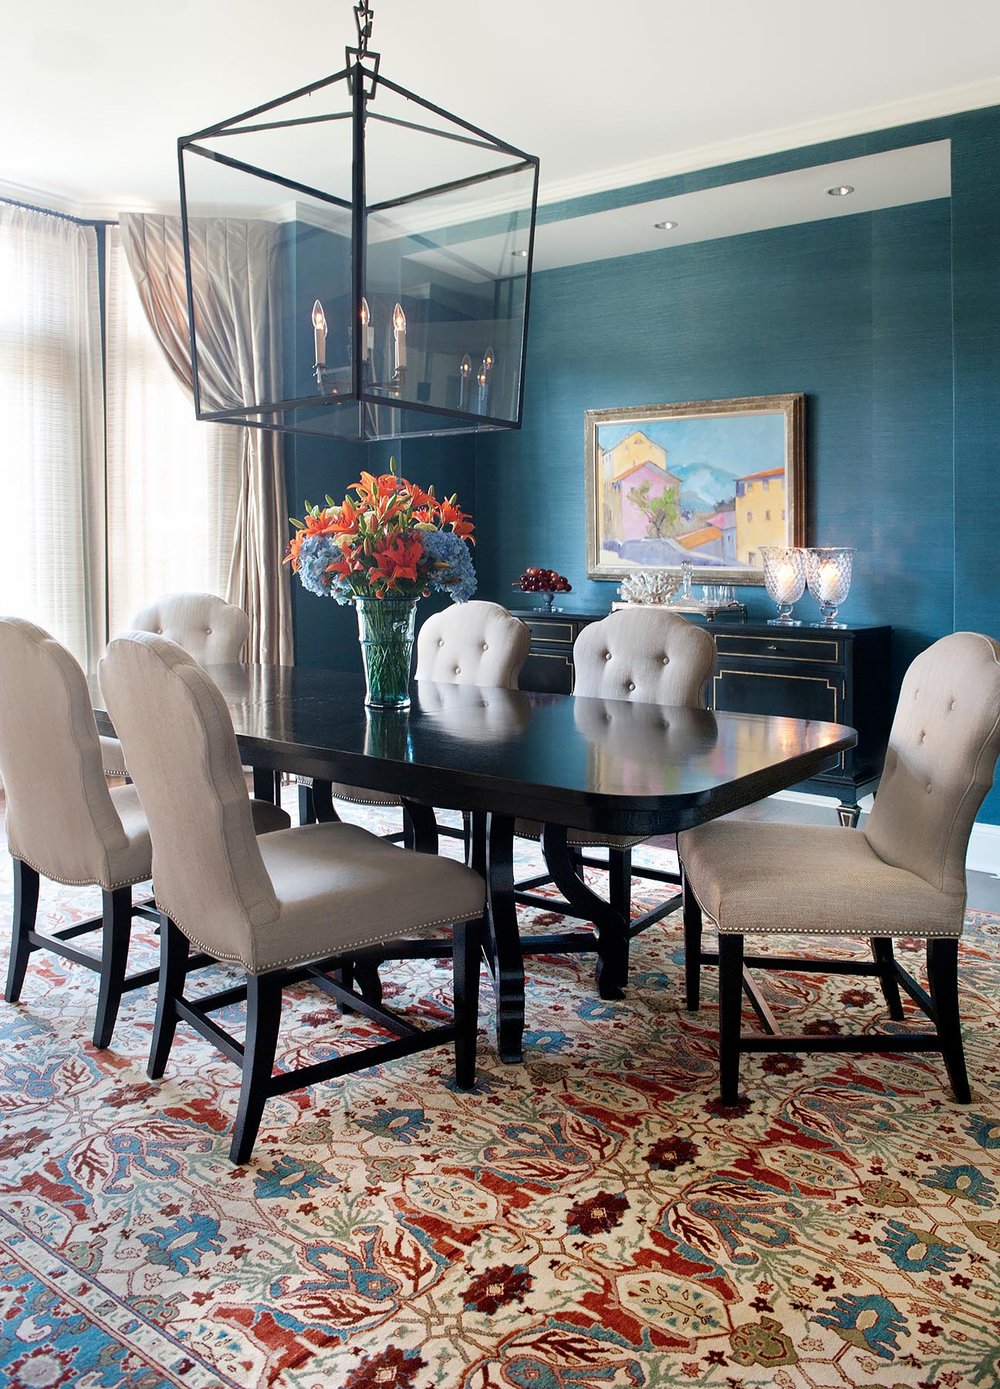 Peacock blue grasscloth wall in a classic dining room. Come see more interior design inspiration from Elizabeth Drake. Photo by Werner Straube. #interiordesign #classicdesign #traditionaldecor #housetour #elizabethdrake